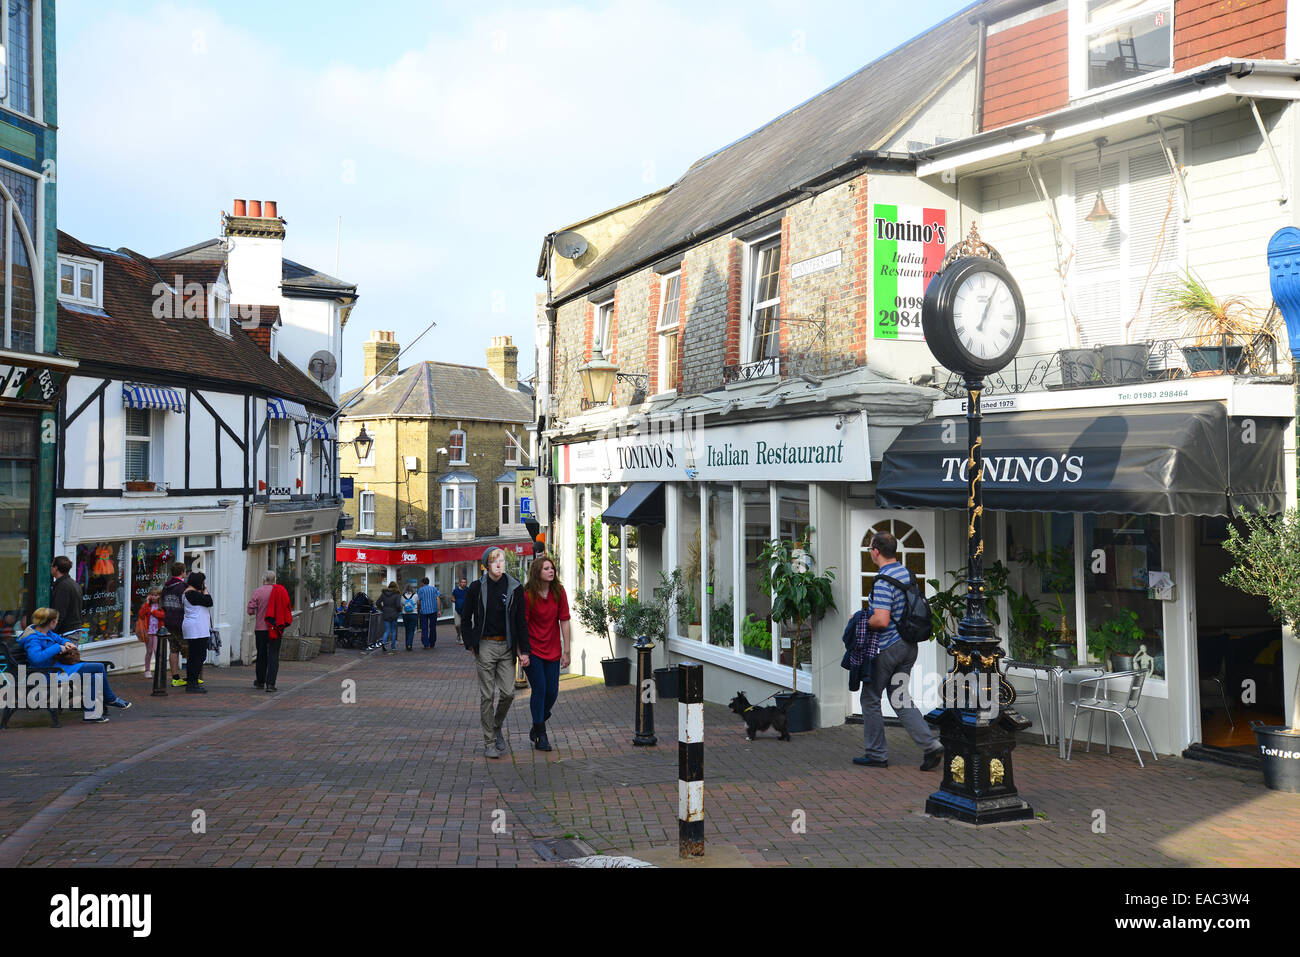 Shooters Hill, High Street, Cowes, île de Wight, Angleterre, Royaume-Uni Banque D'Images